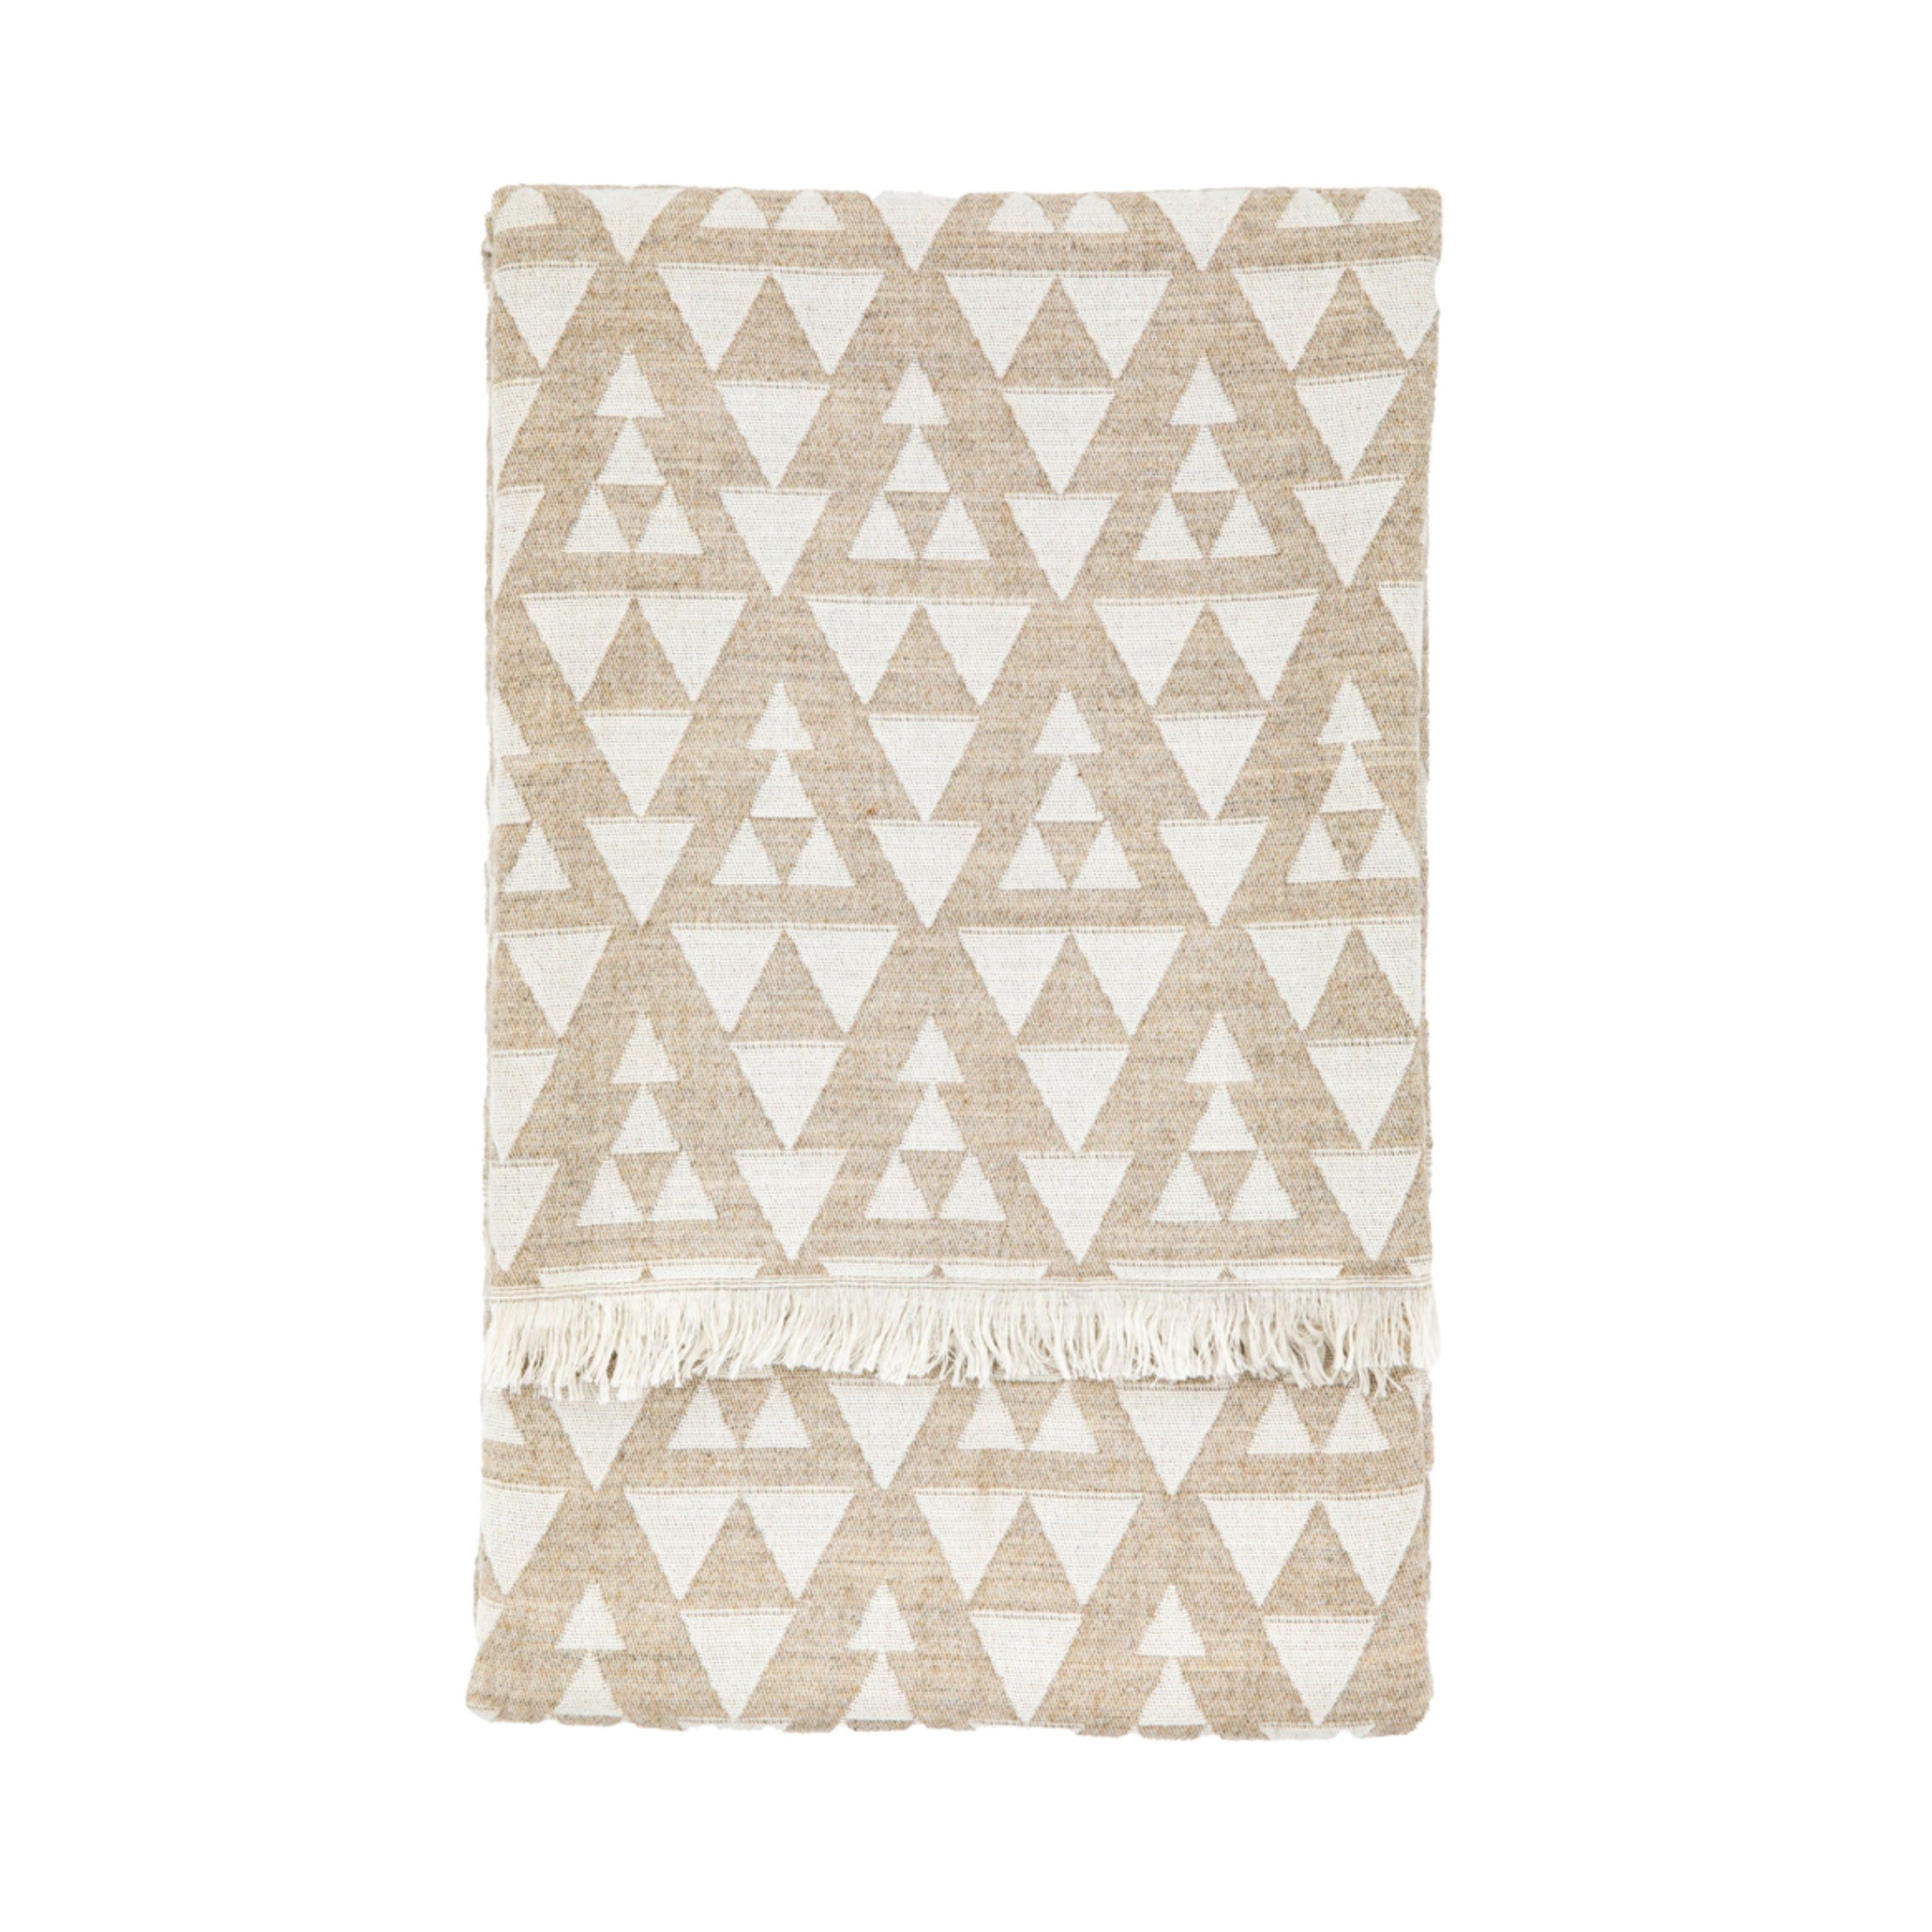 Soft Geometric Patterned Printed Throw